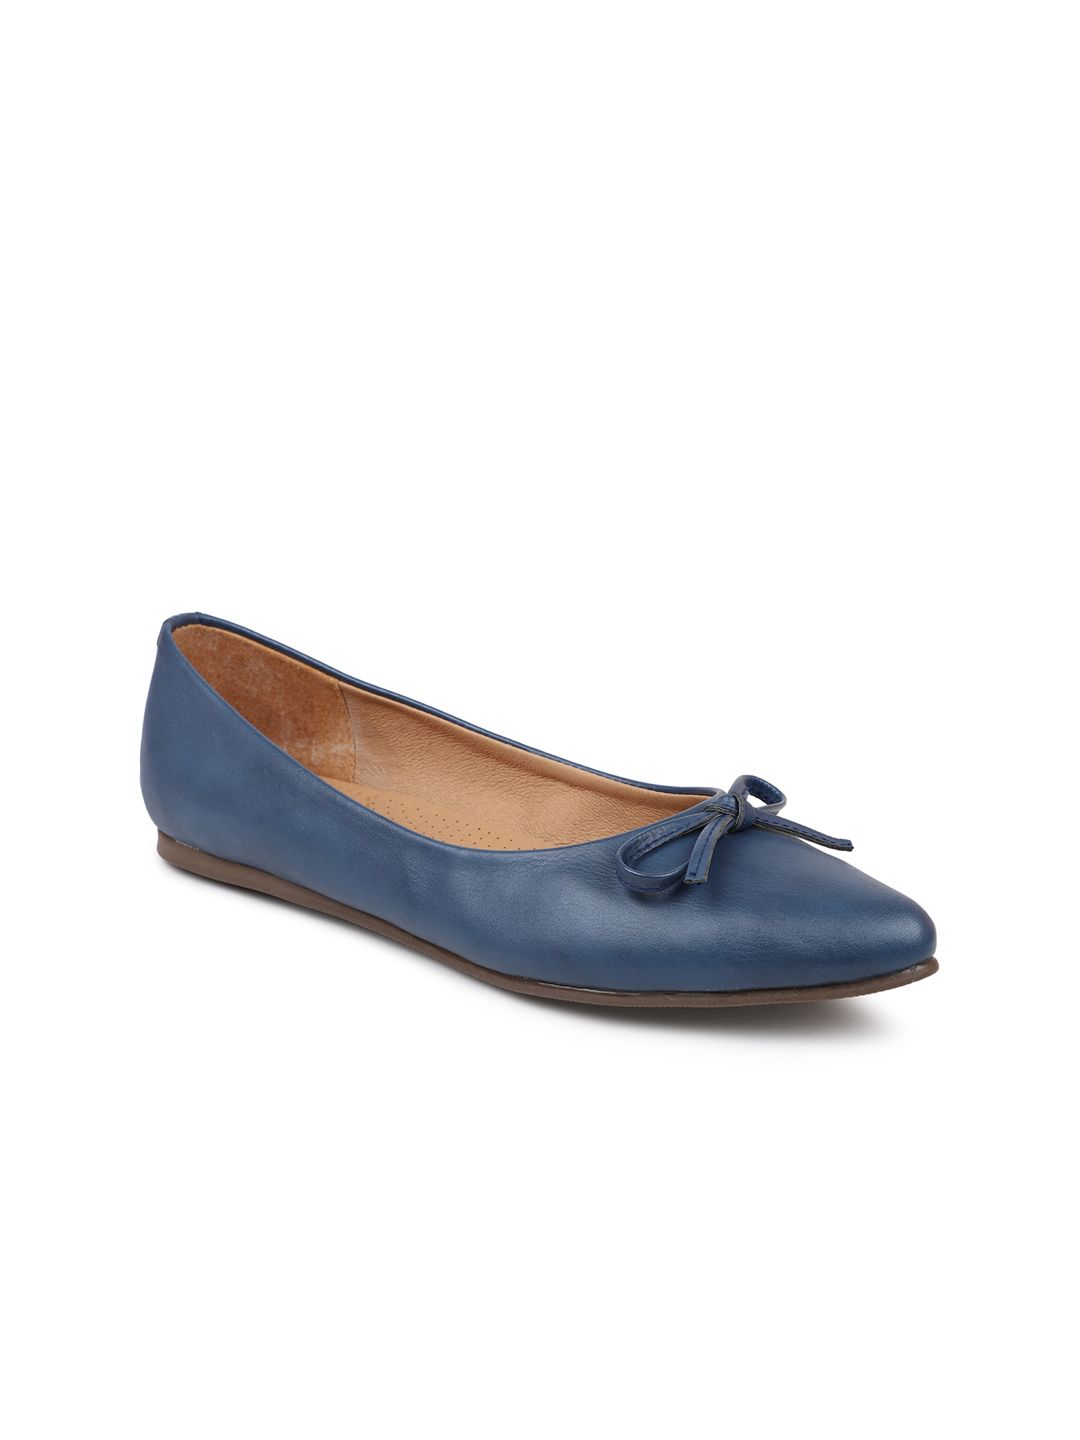 Inc 5 Women Blue Textured Bows Ballerinas Flats Price in India